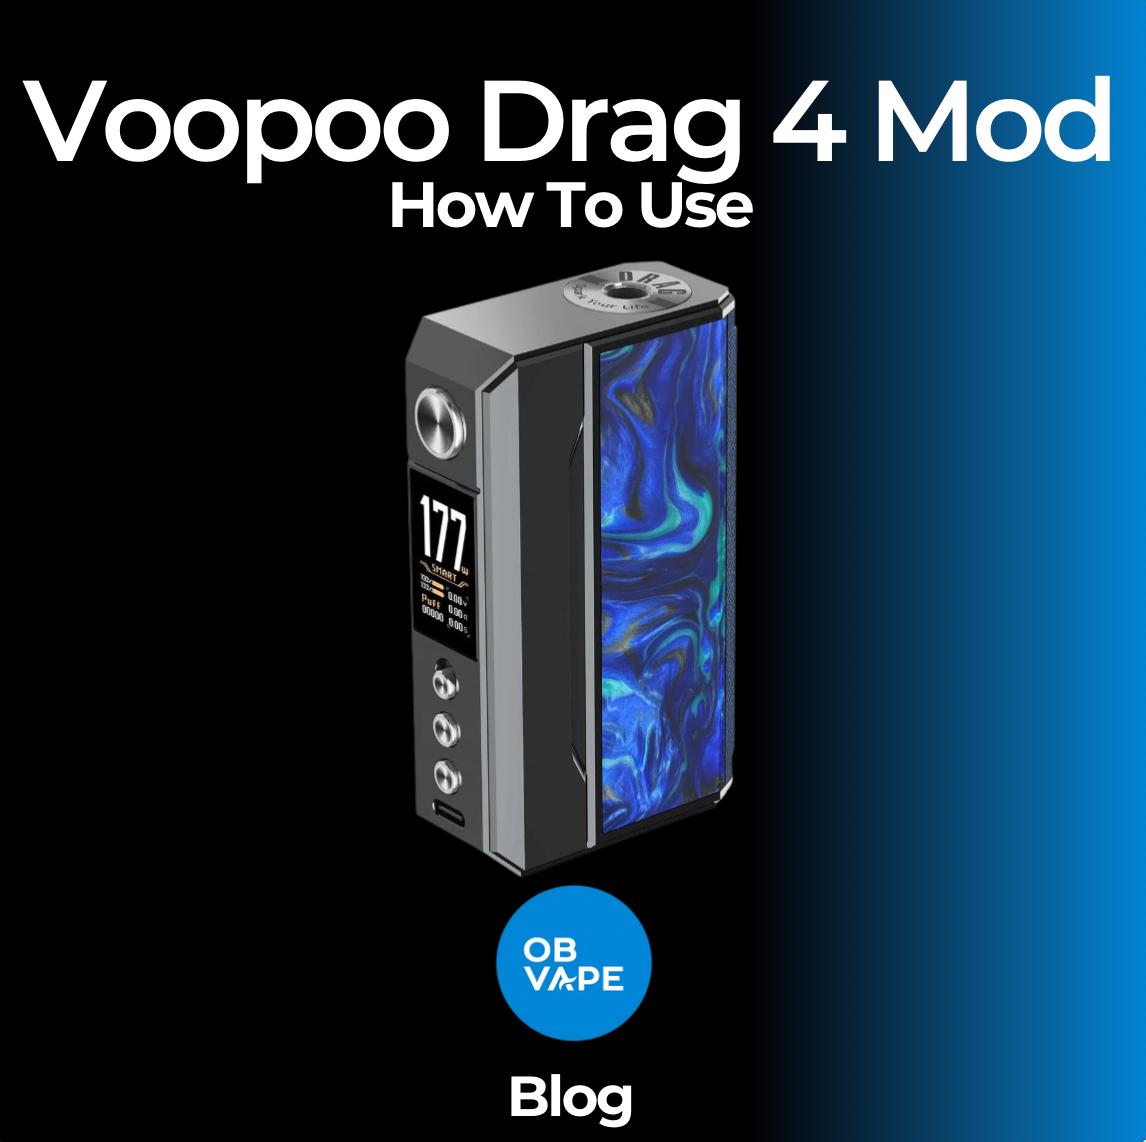 How To Use The Voopoo Drag 4 Mod